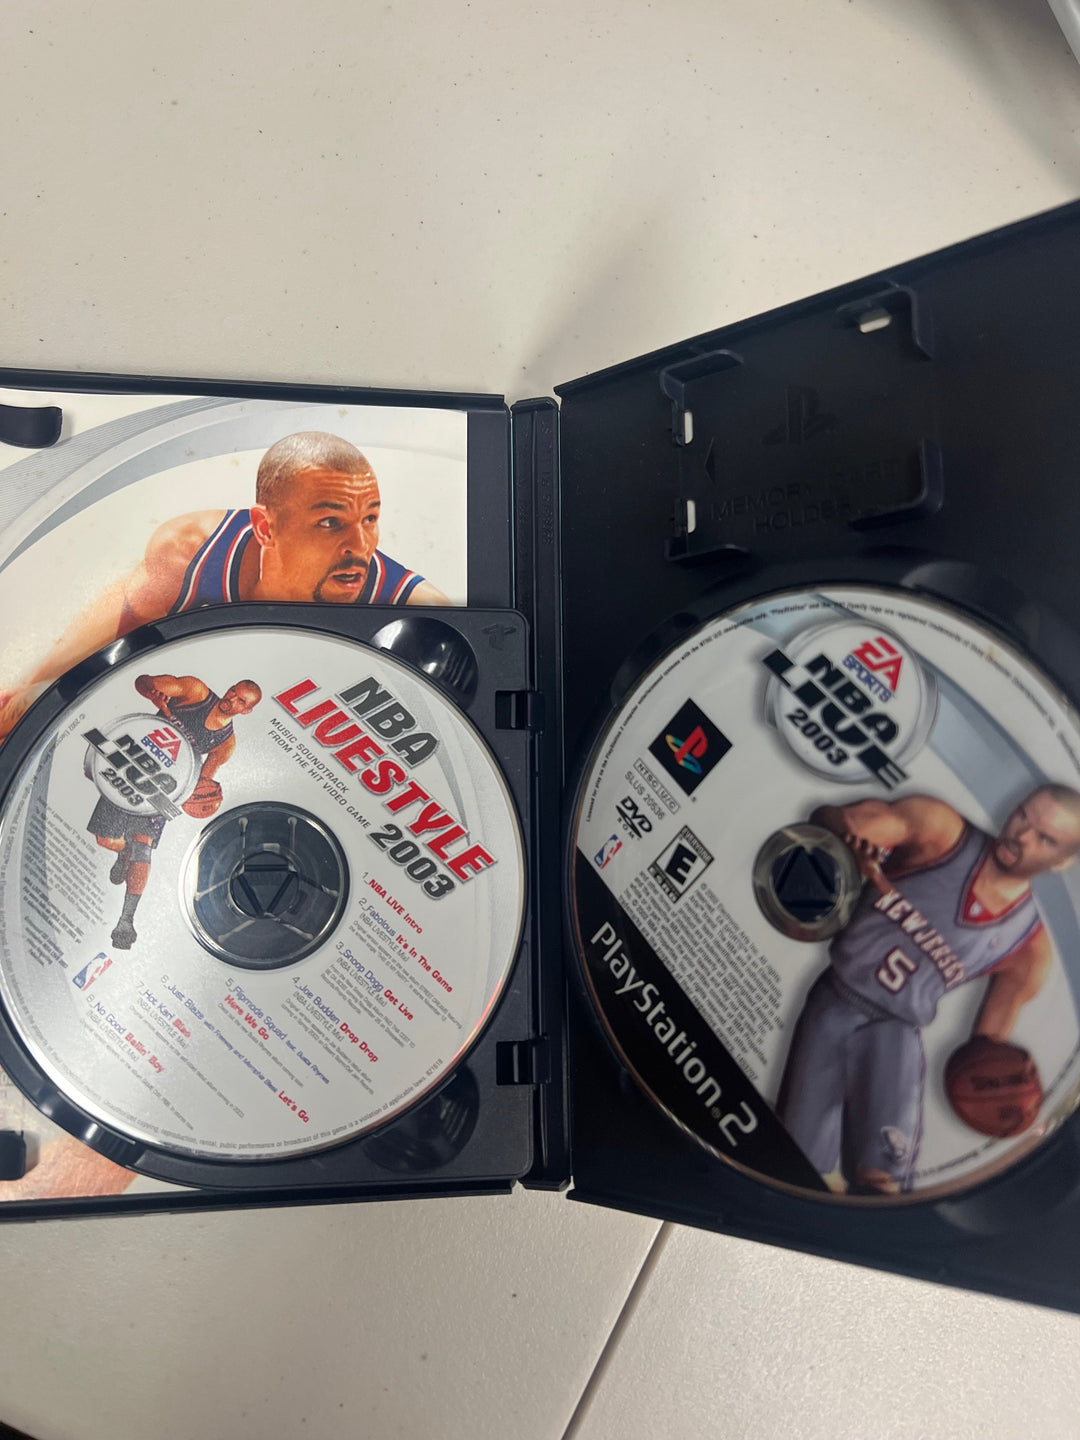 NBA Live 2003 for Playstation 2 PS2 in case. Tested and Working.     DO63024